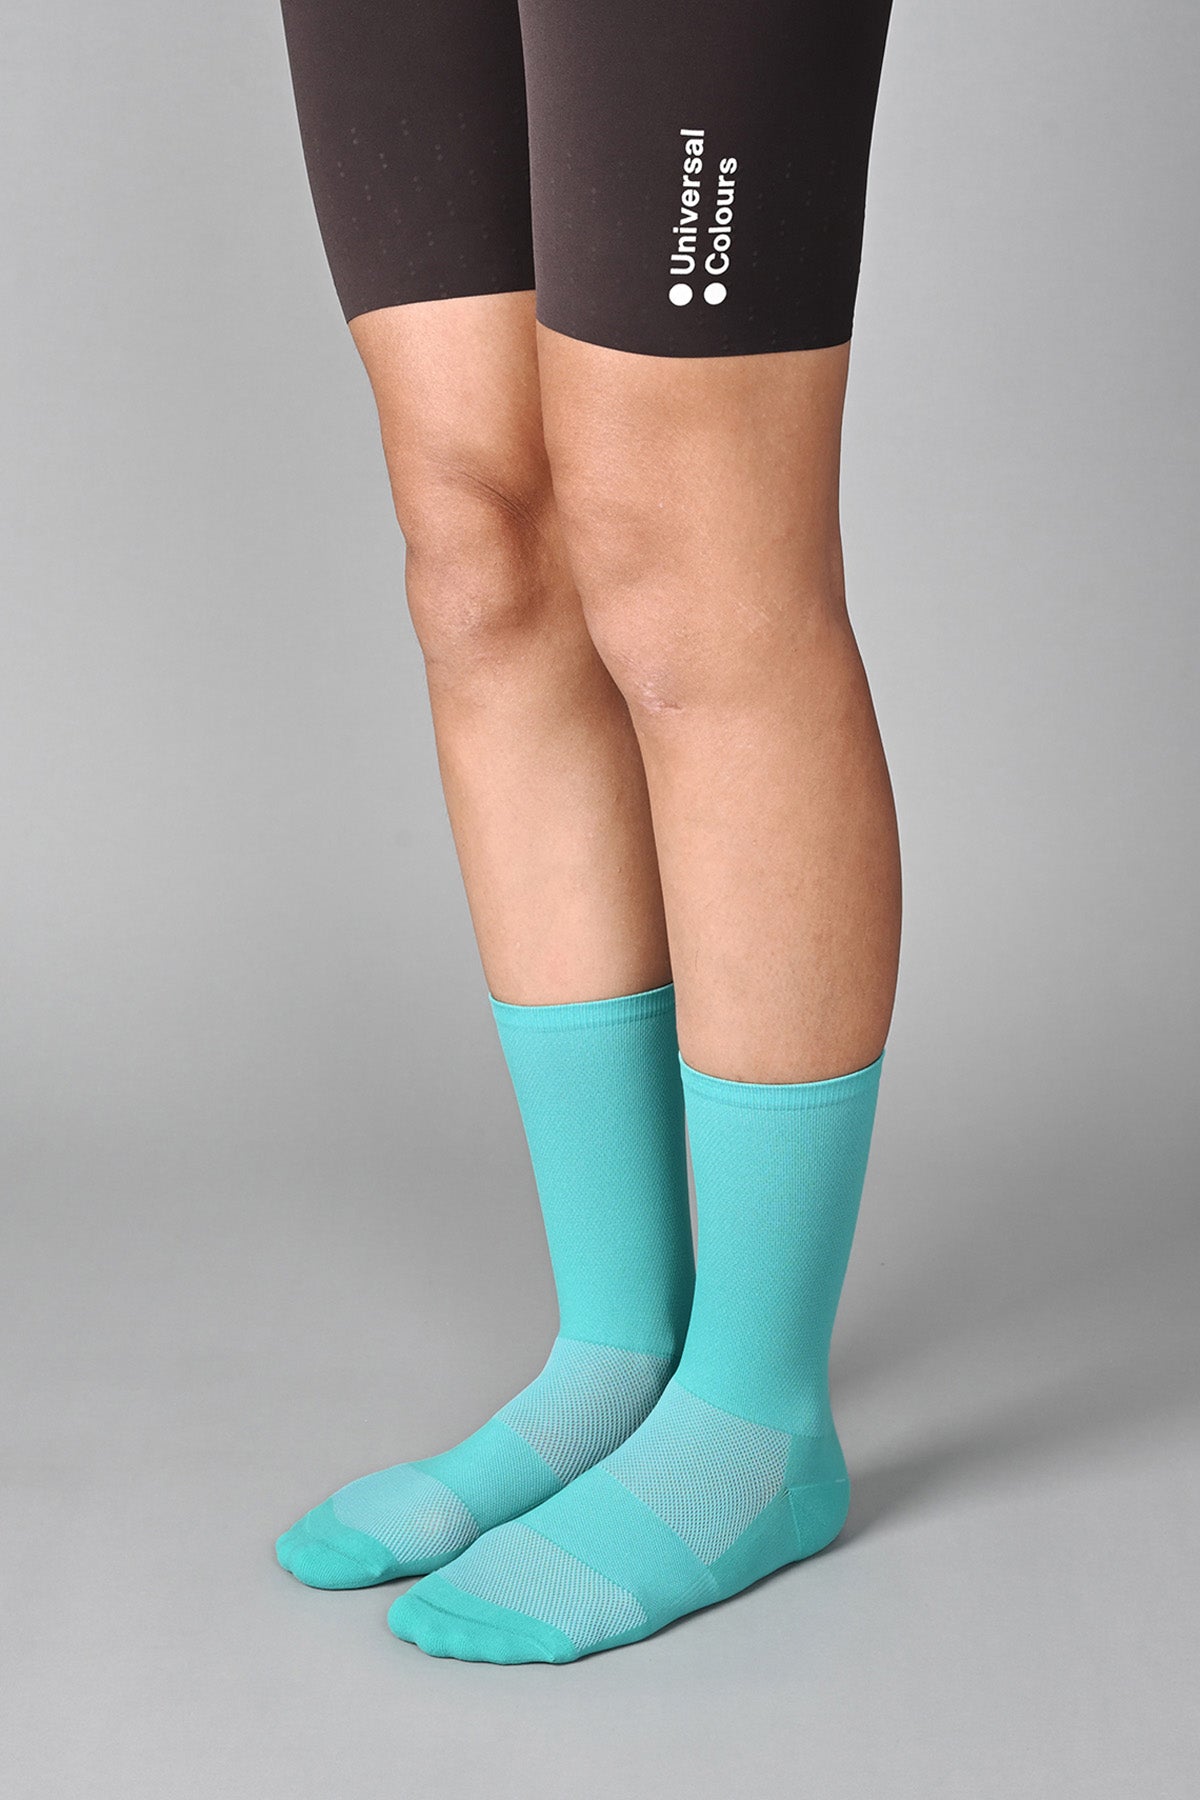 STEALTH - TIFFANY BLUE FRONT SIDE | BEST CYCLING SOCKS